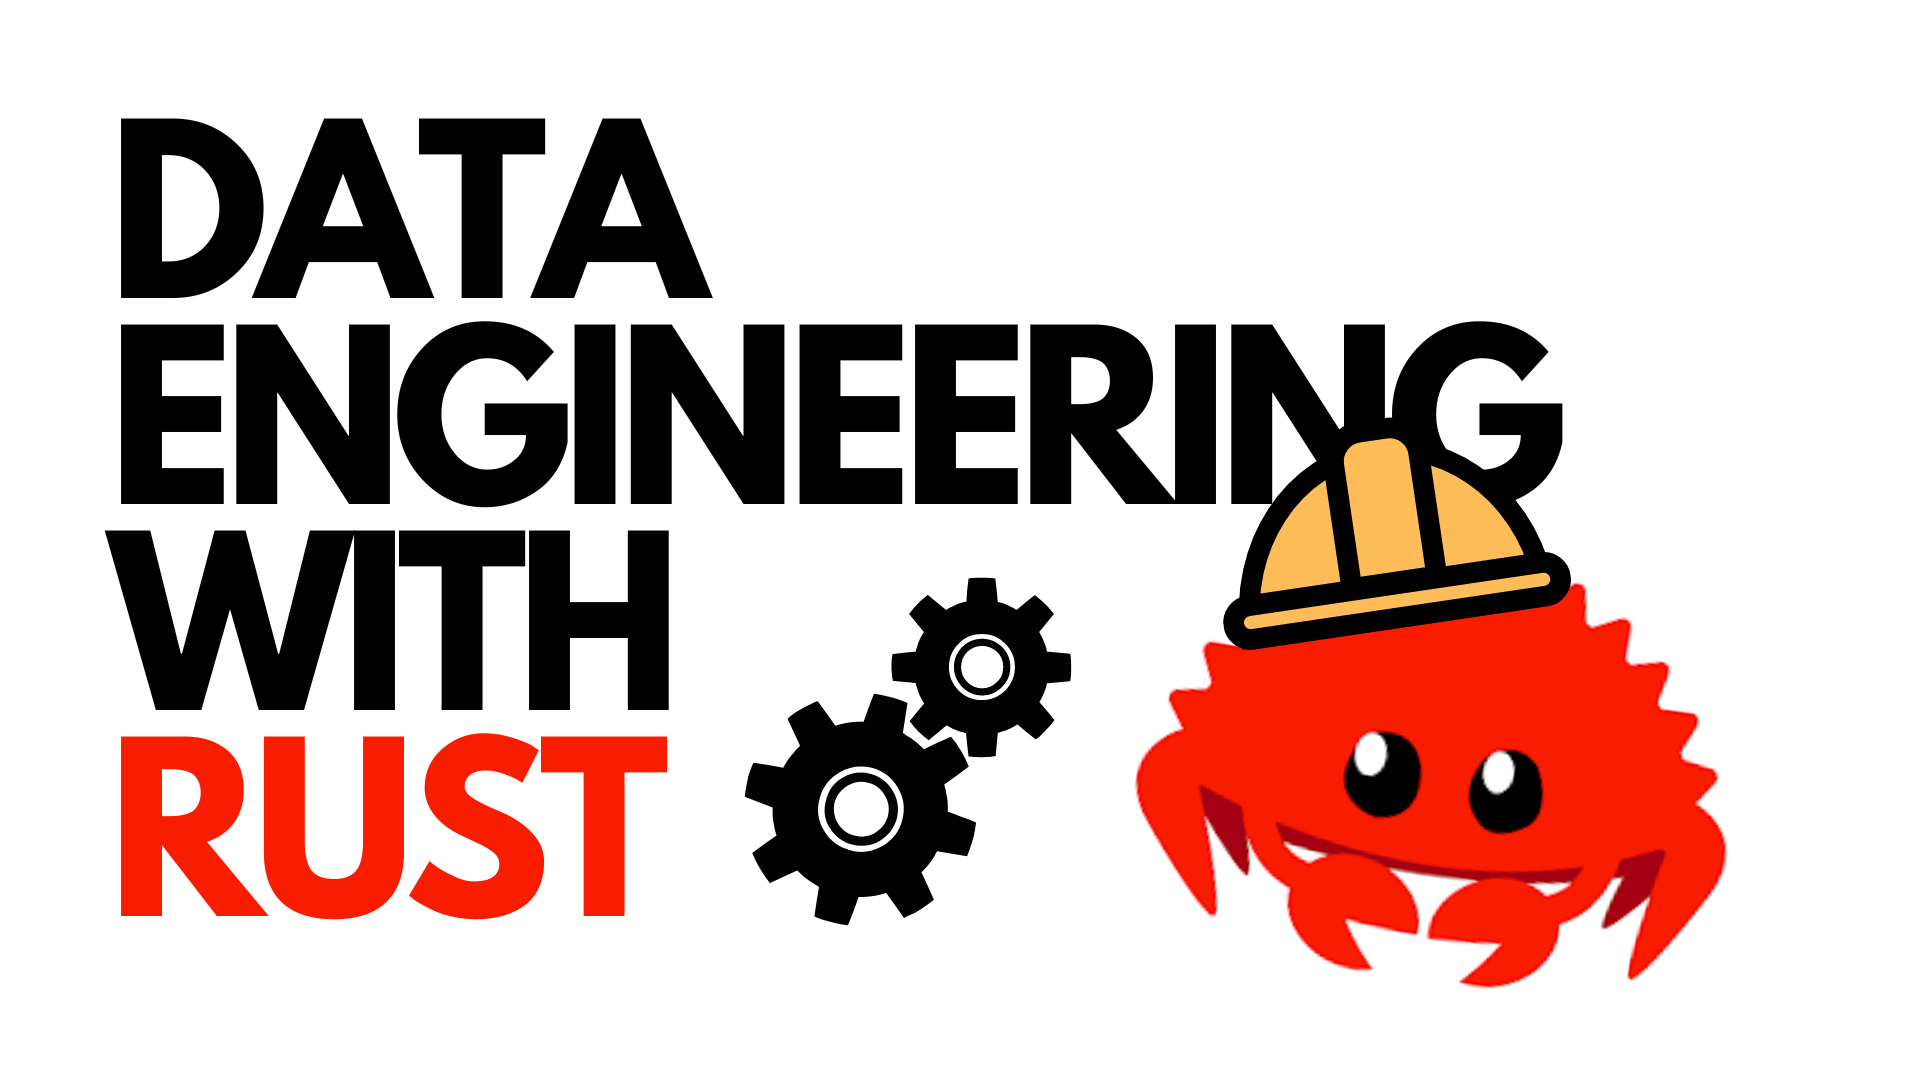 This is a practical handbook on how to get started using Rust for Data Engineering tasks. I'll show you practical examples of how Rust can be used for